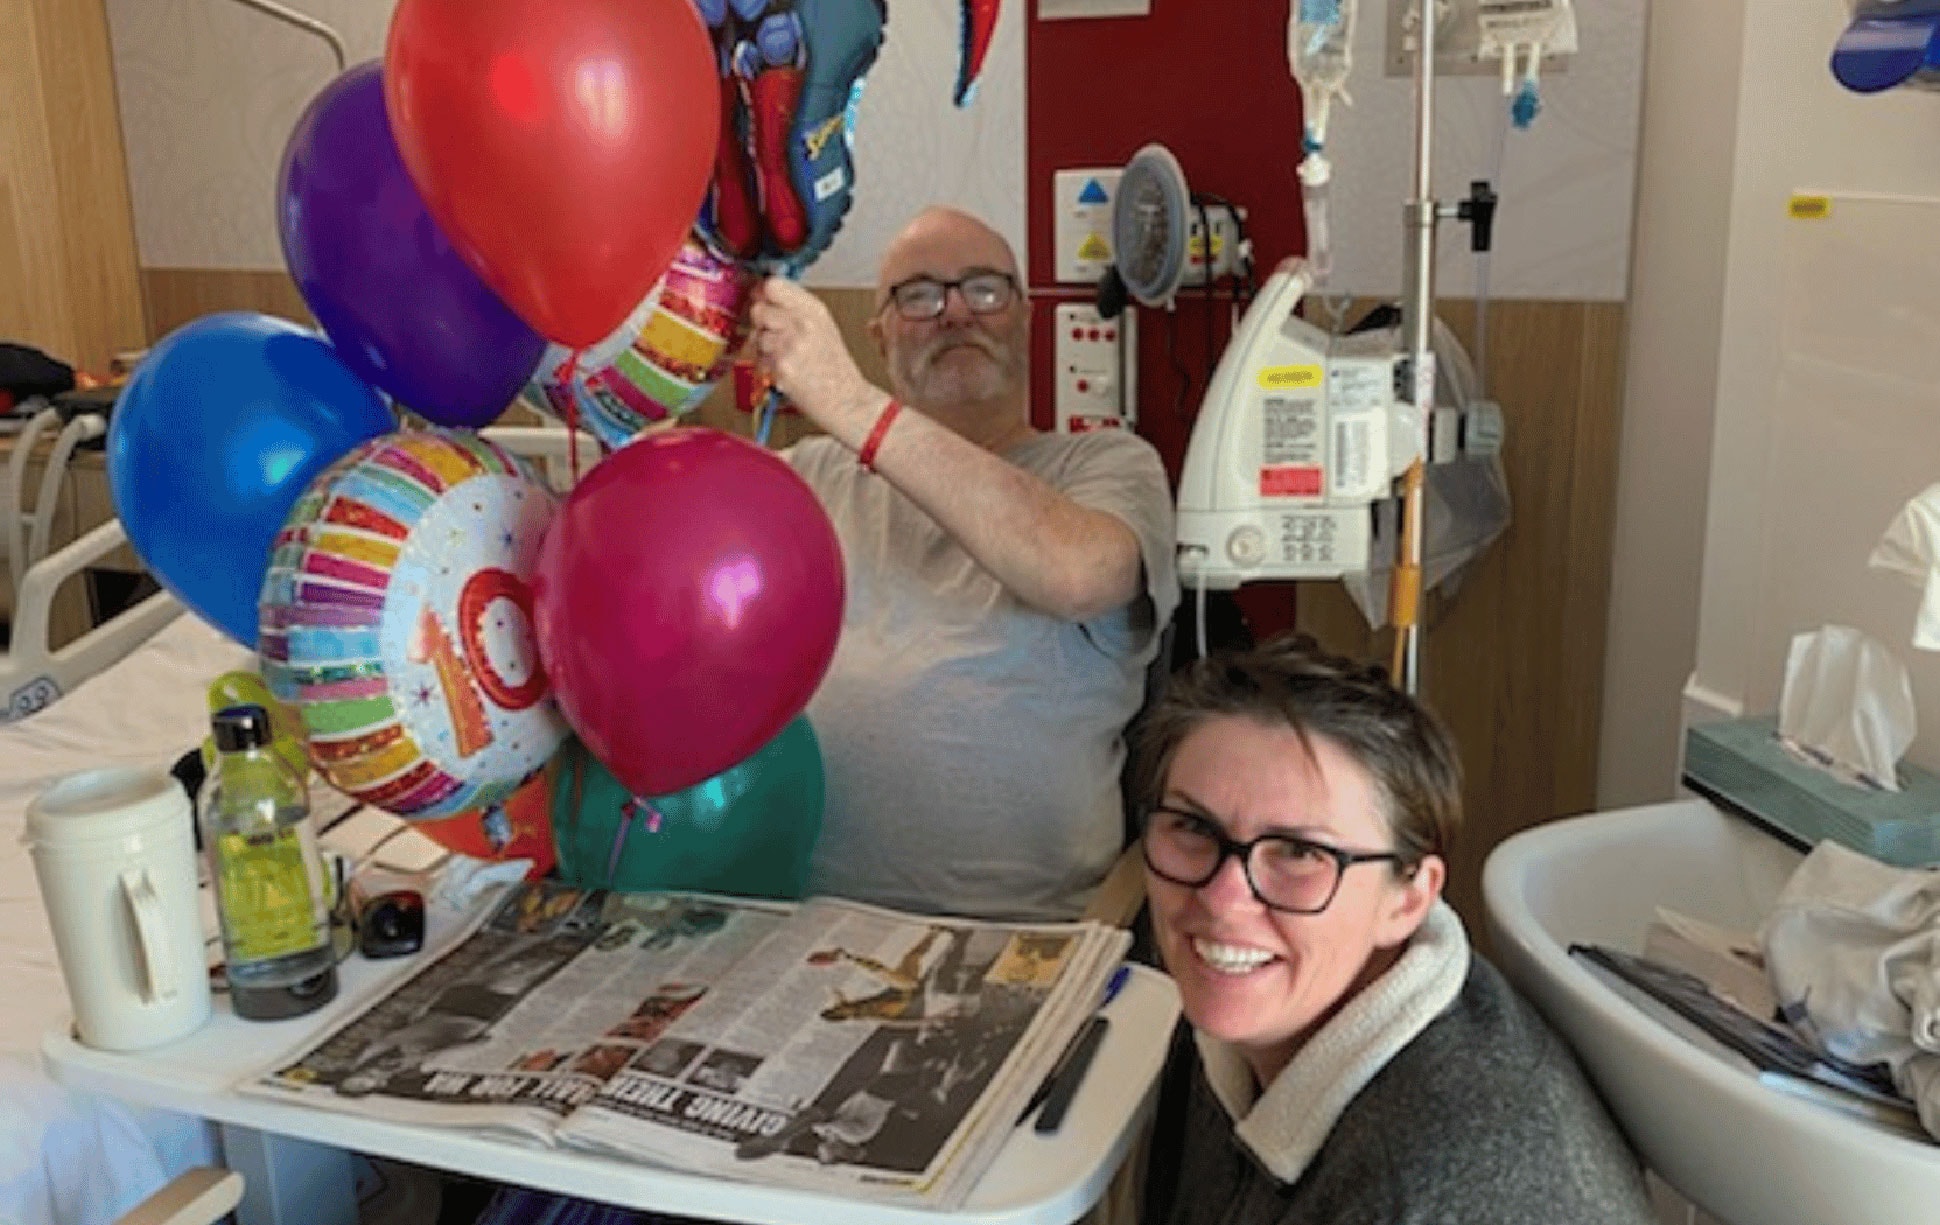 Perth musician, husband and father Errol Tout and wife Sandie in a patient room surrounded by helium balloons